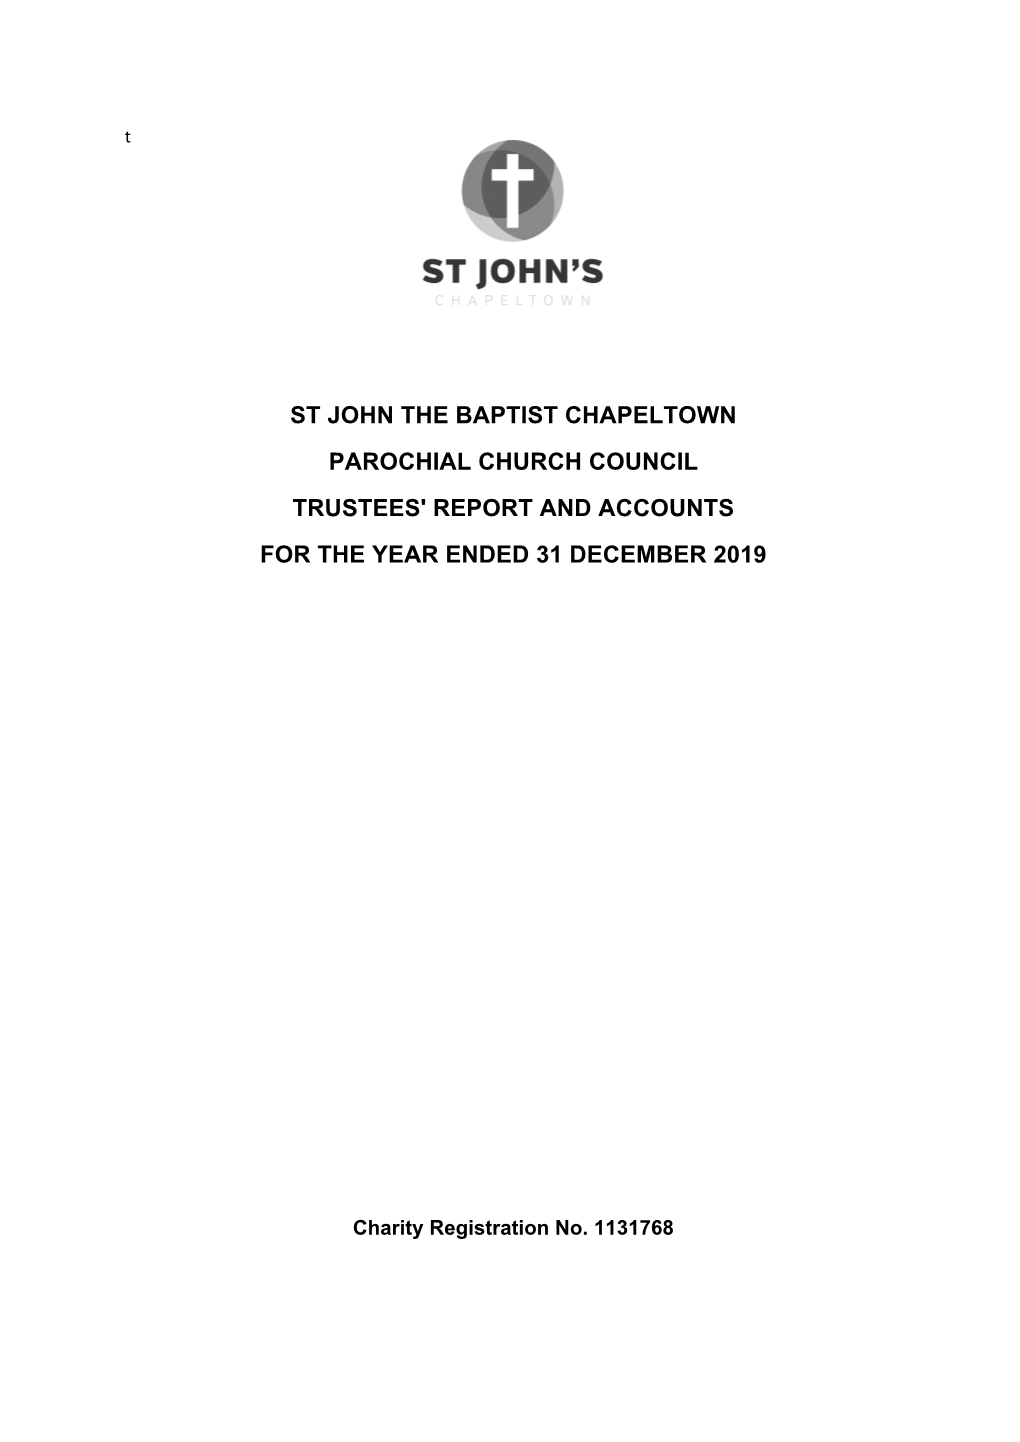 St John the Baptist Chapeltown Parochial Church Council Trustees' Report and Accounts for the Year Ended 31 December 2019